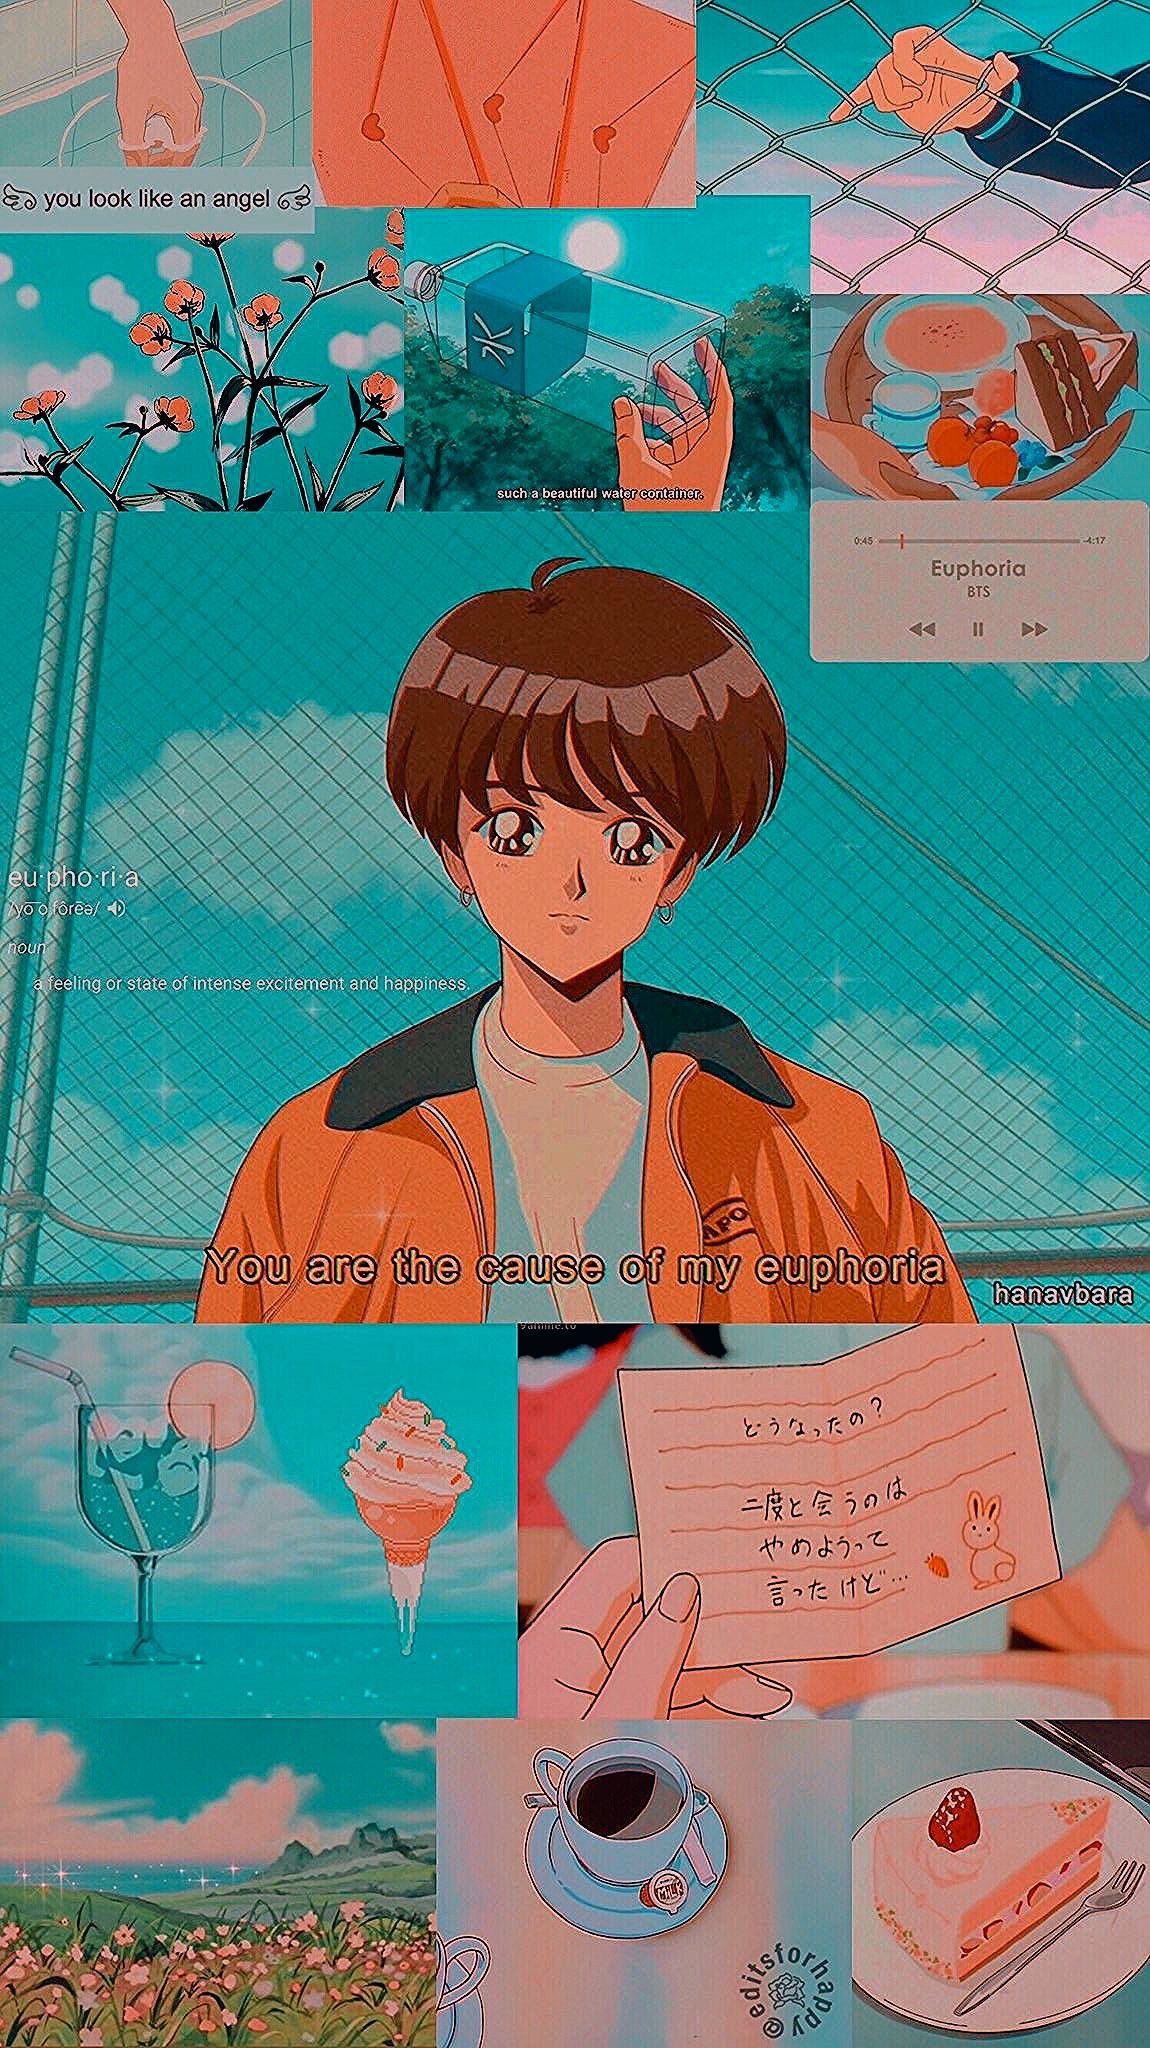 Jungkook Aesthetic Anime Wallpaper / Credits to twitter